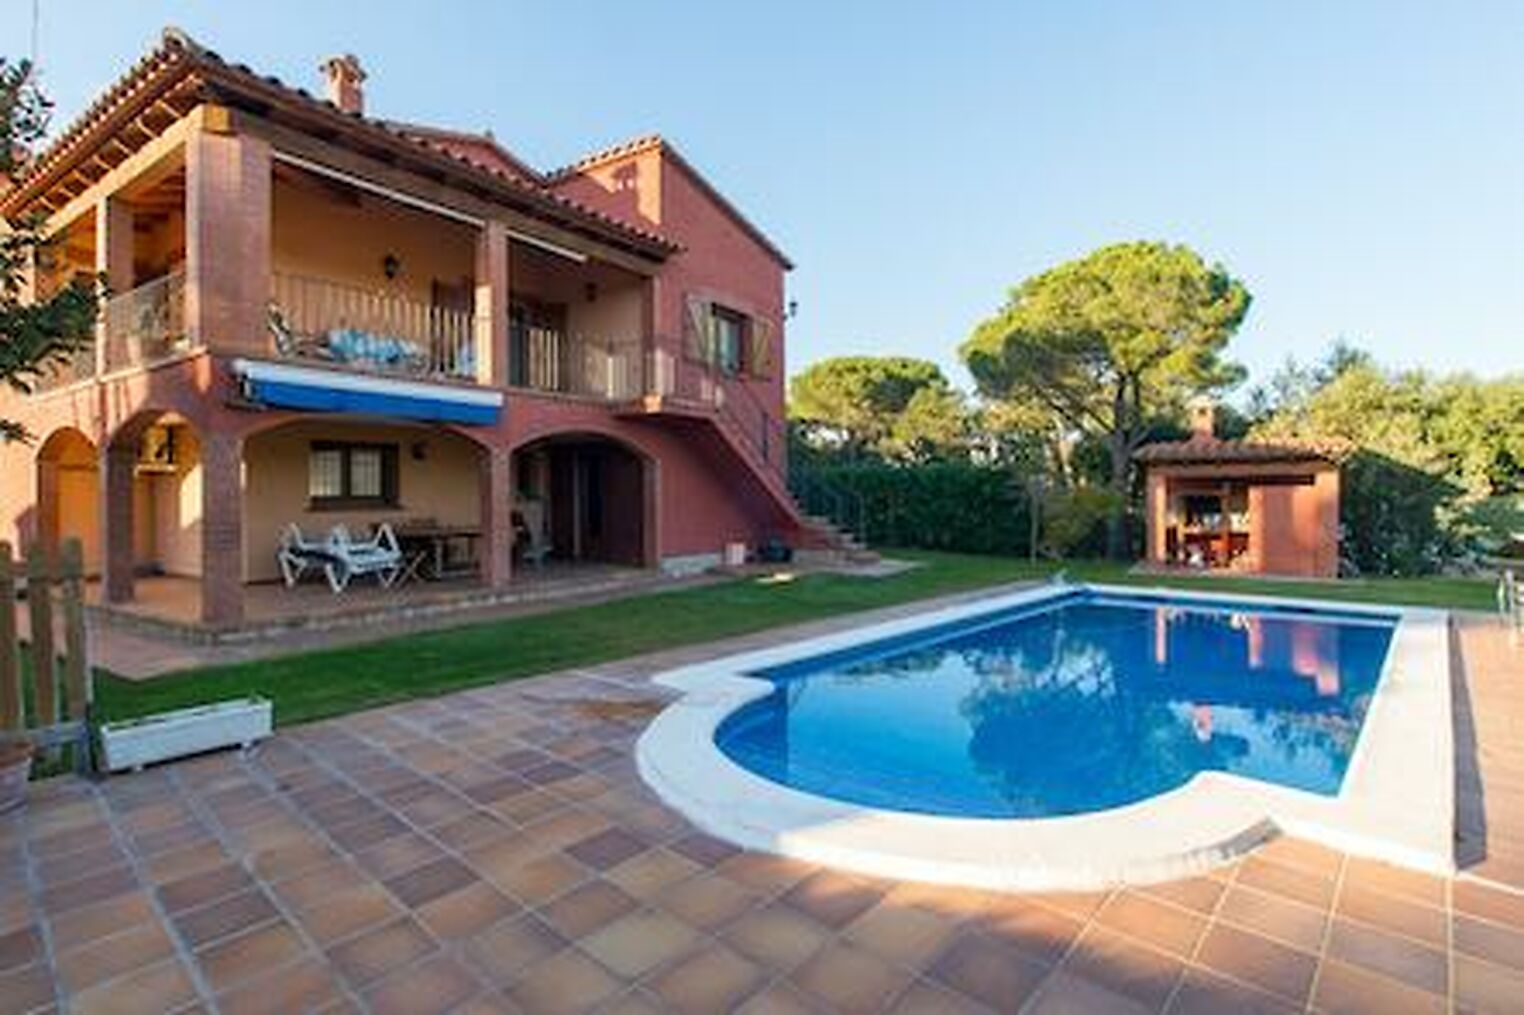 Superb, large detached villa, built to a very high standard, well maintained and close to the pretty village of Calonge and Playa de Aro.